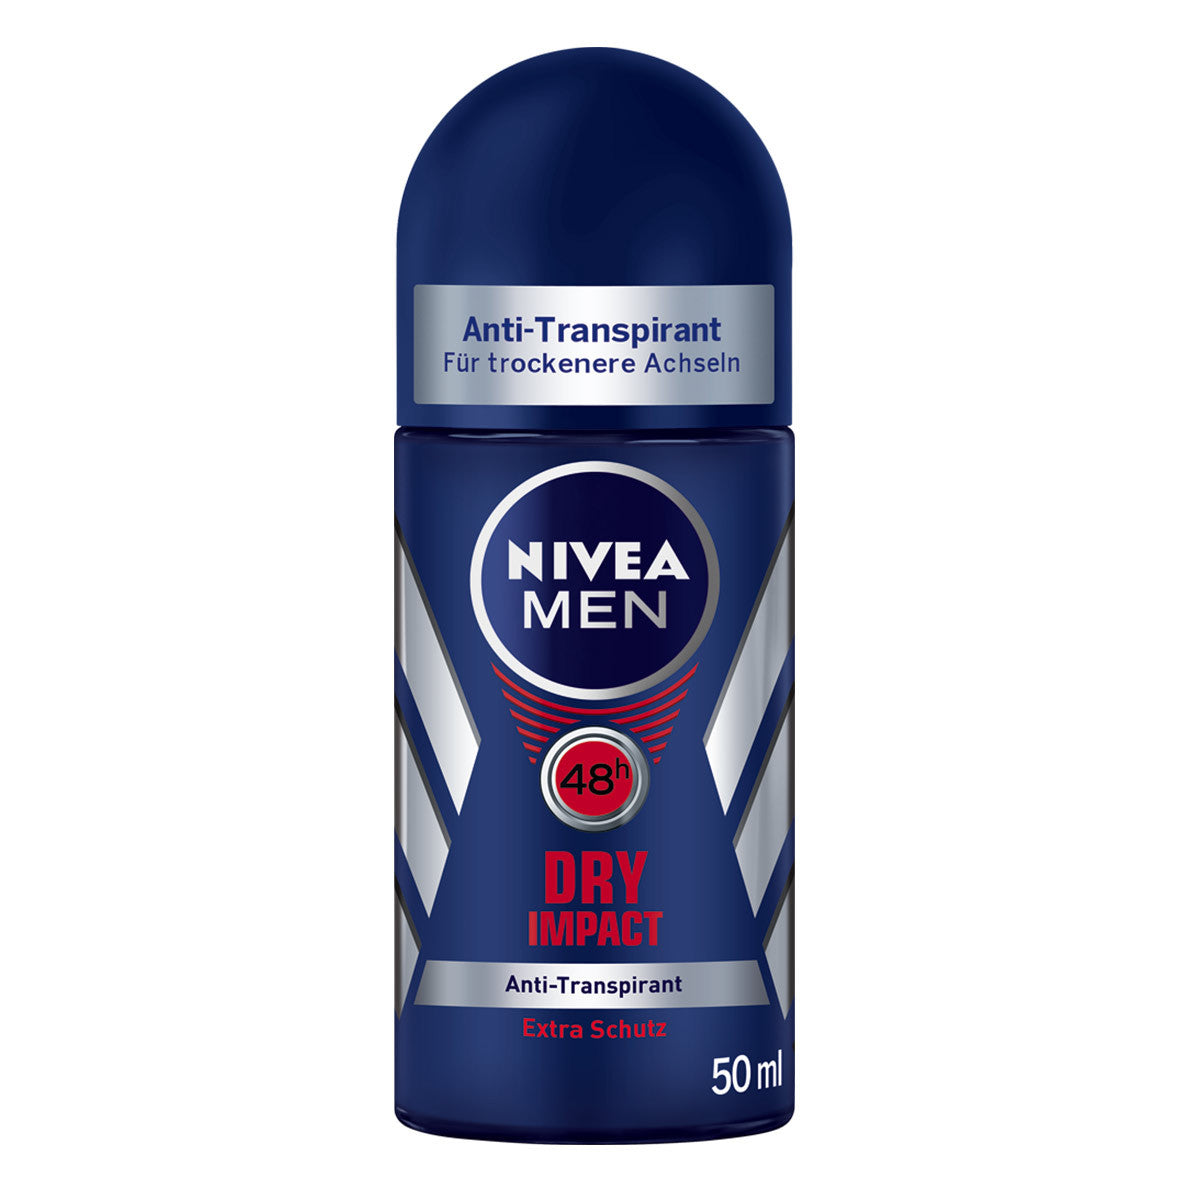 Primary image of Dry Impact Deodorant Roll-On for Men